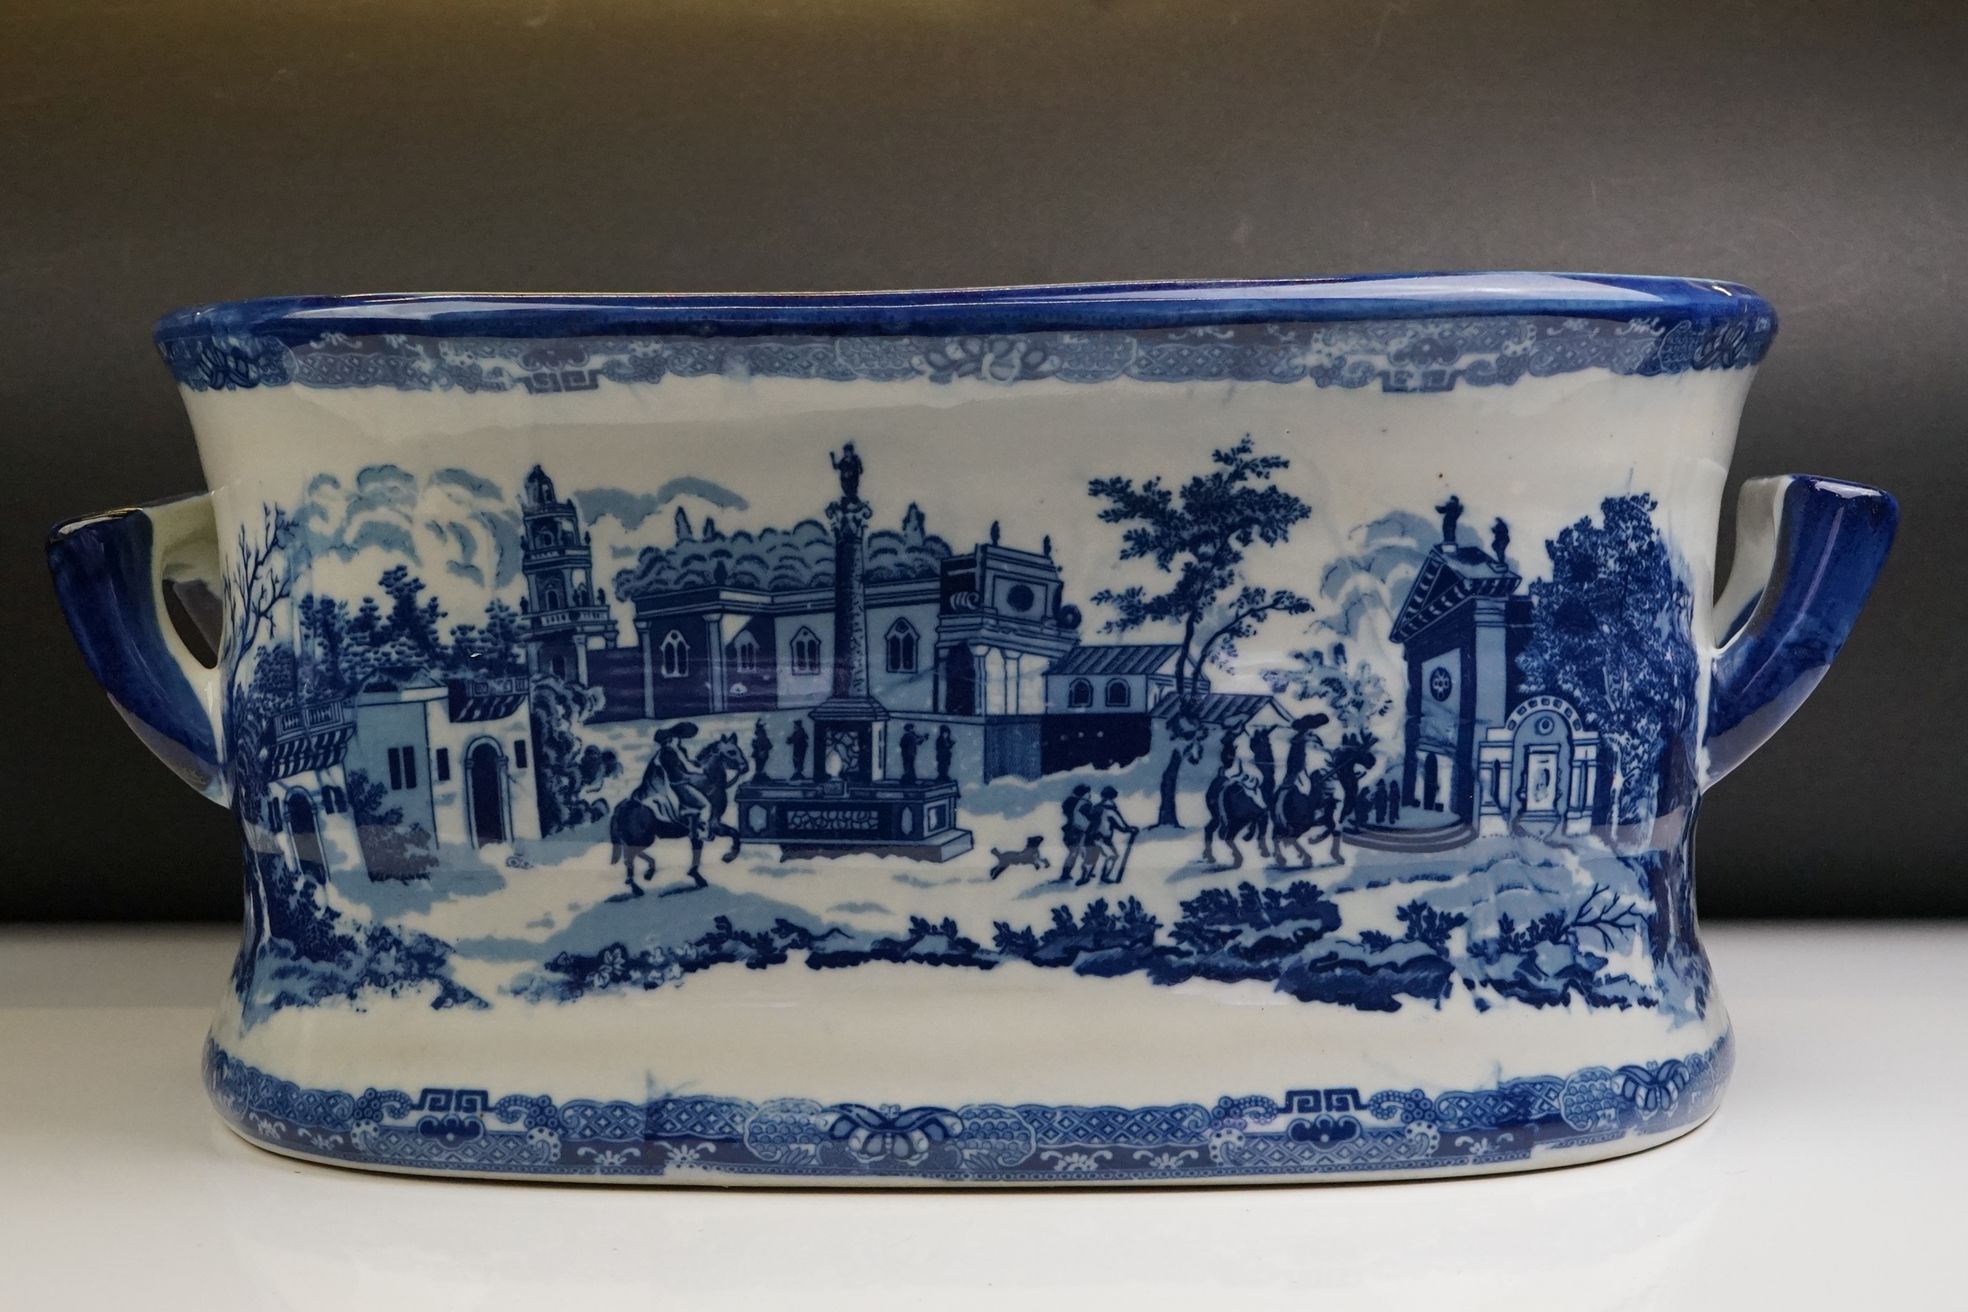 Blue & White Ironstone Foot Bath with typical transfer printed decoration, approximately 47cm wide - Image 2 of 10